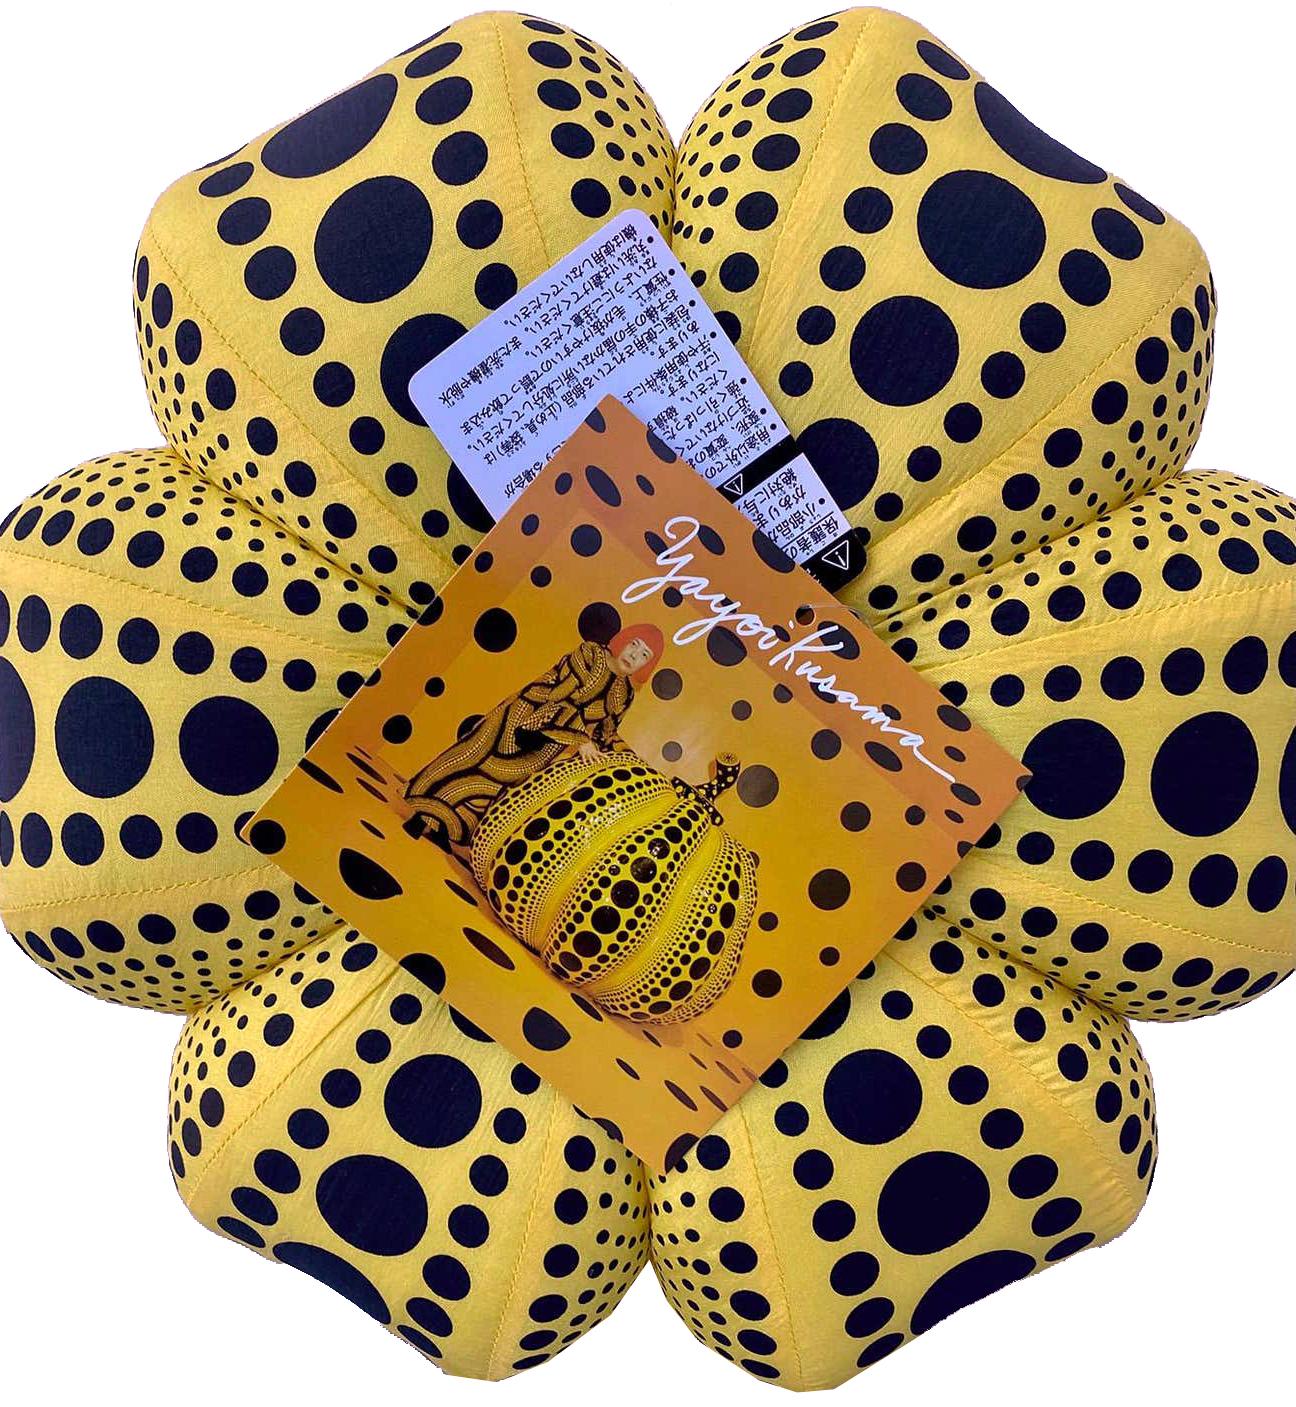 Yayoi Kusama Yellow & Black Pumpkin (plush):
An iconic, vibrantly colored pop art piece - this Kusama plush pumpkin features the universal polka dot patterns and bold colors for which the artist is perhaps best known. Kusama first used the pumpkin